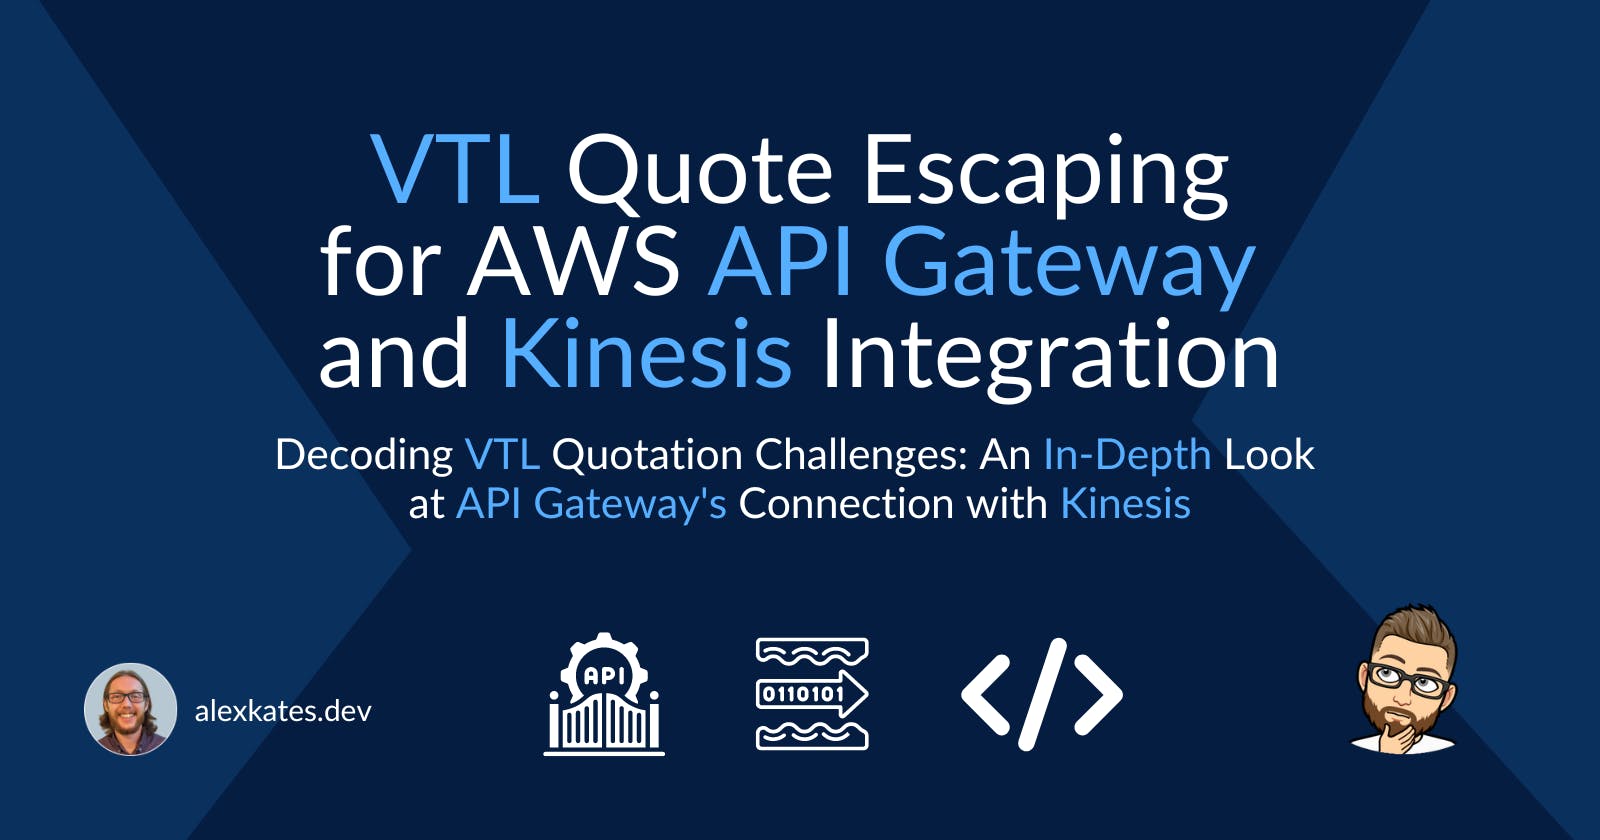 VTL Quote Escaping for AWS API Gateway and Kinesis Integration